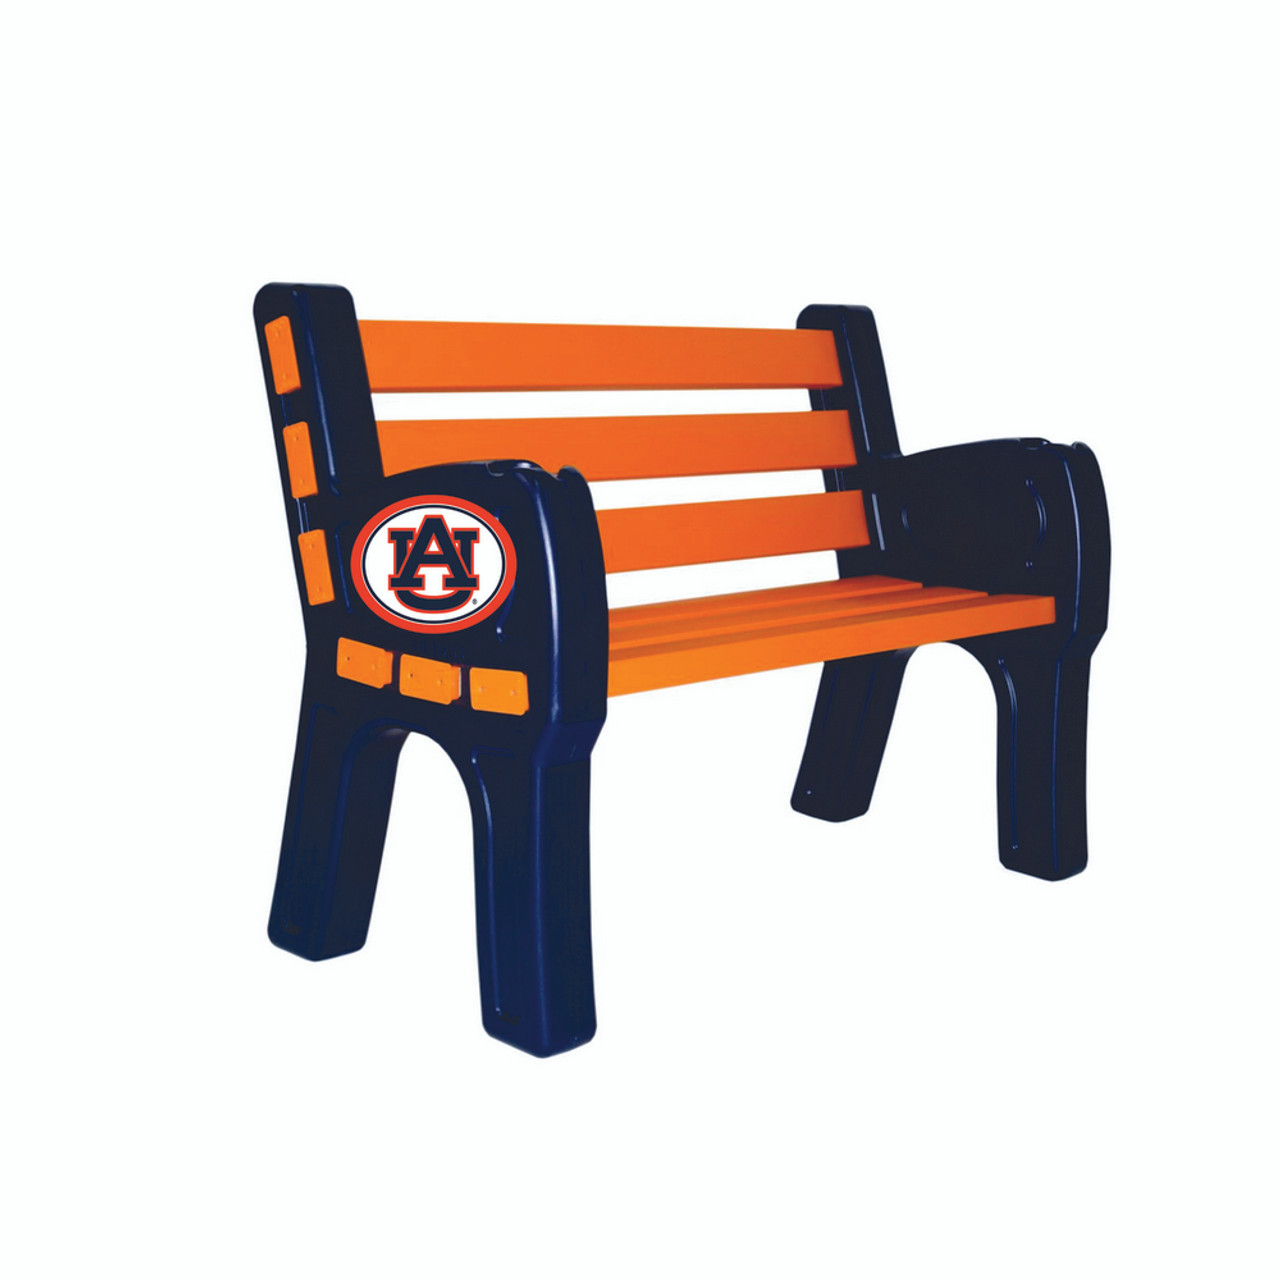 388-3002, Auburn, Tigers, 4', 48" Park, Bench, FREE SHIPPING, NCAA, Imperial